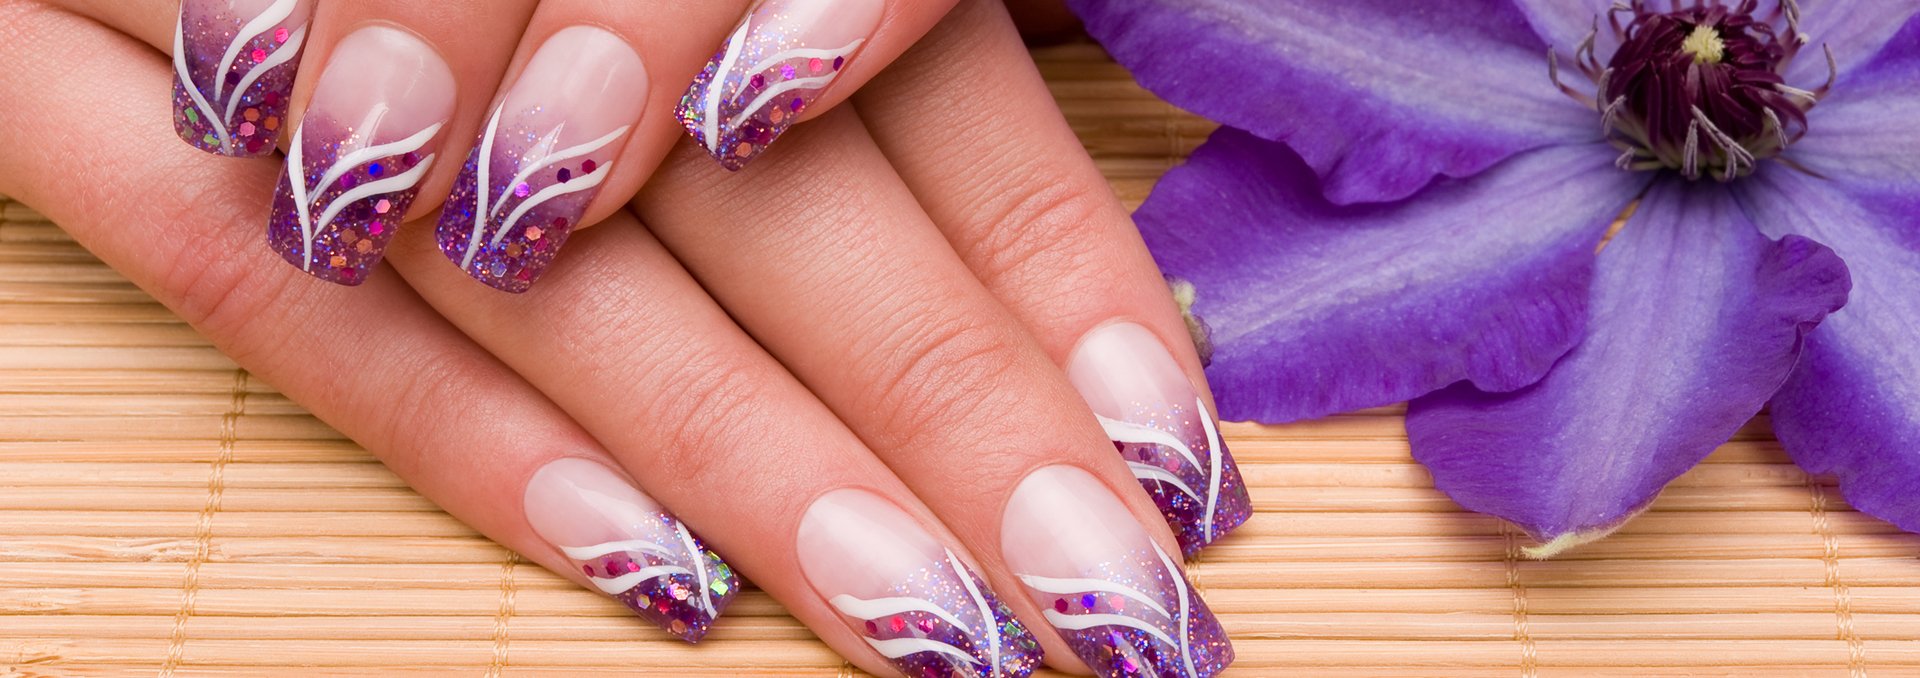 Artificial Nails Market by Size, Share, Segmentation and Global Forecast -  2030 | MRFR